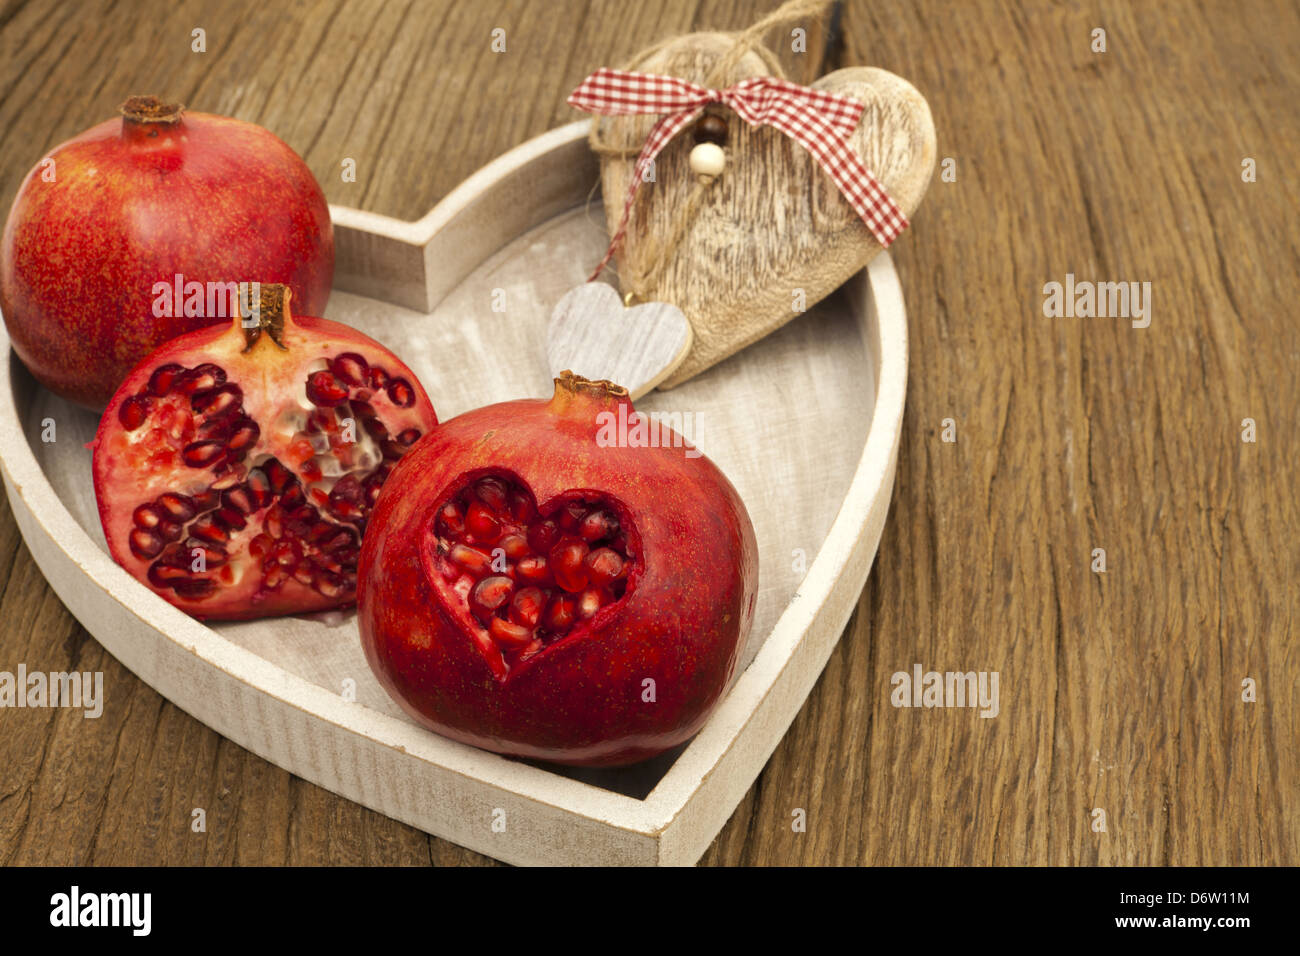 Two whole and one half pomegranate on a tray with a wooden heart, a pomegranate with a heart-shaped cutout Stock Photo